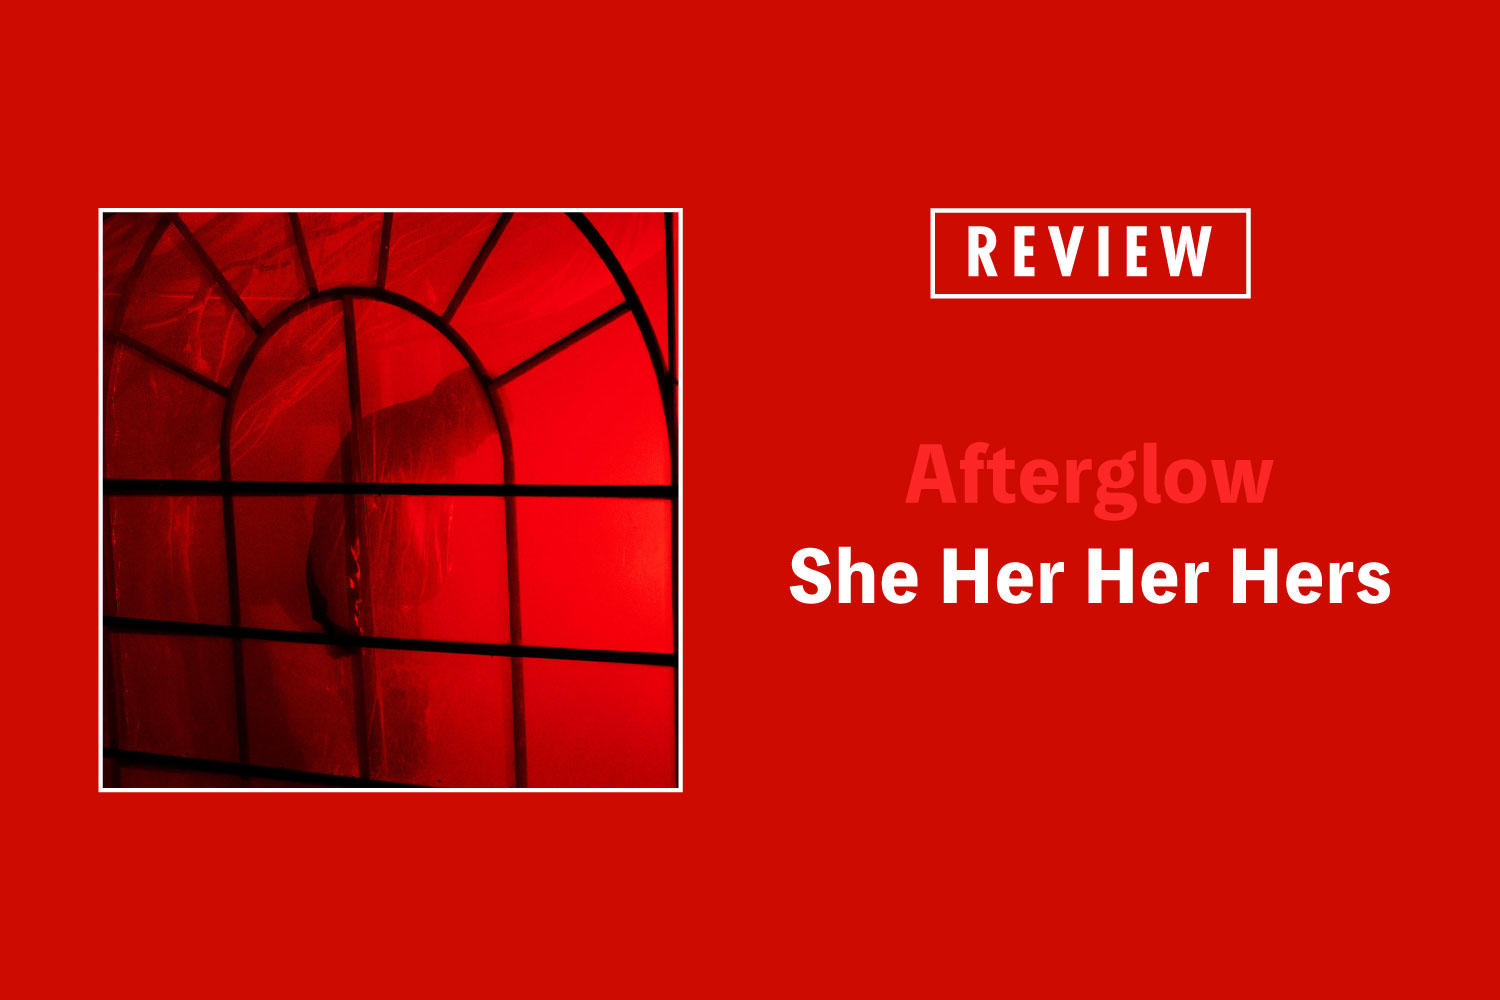 She Her Her Hers「Afterglow」──心と濃密に触れ合い、痛みを超えていく。エモーショナルな音楽の旅